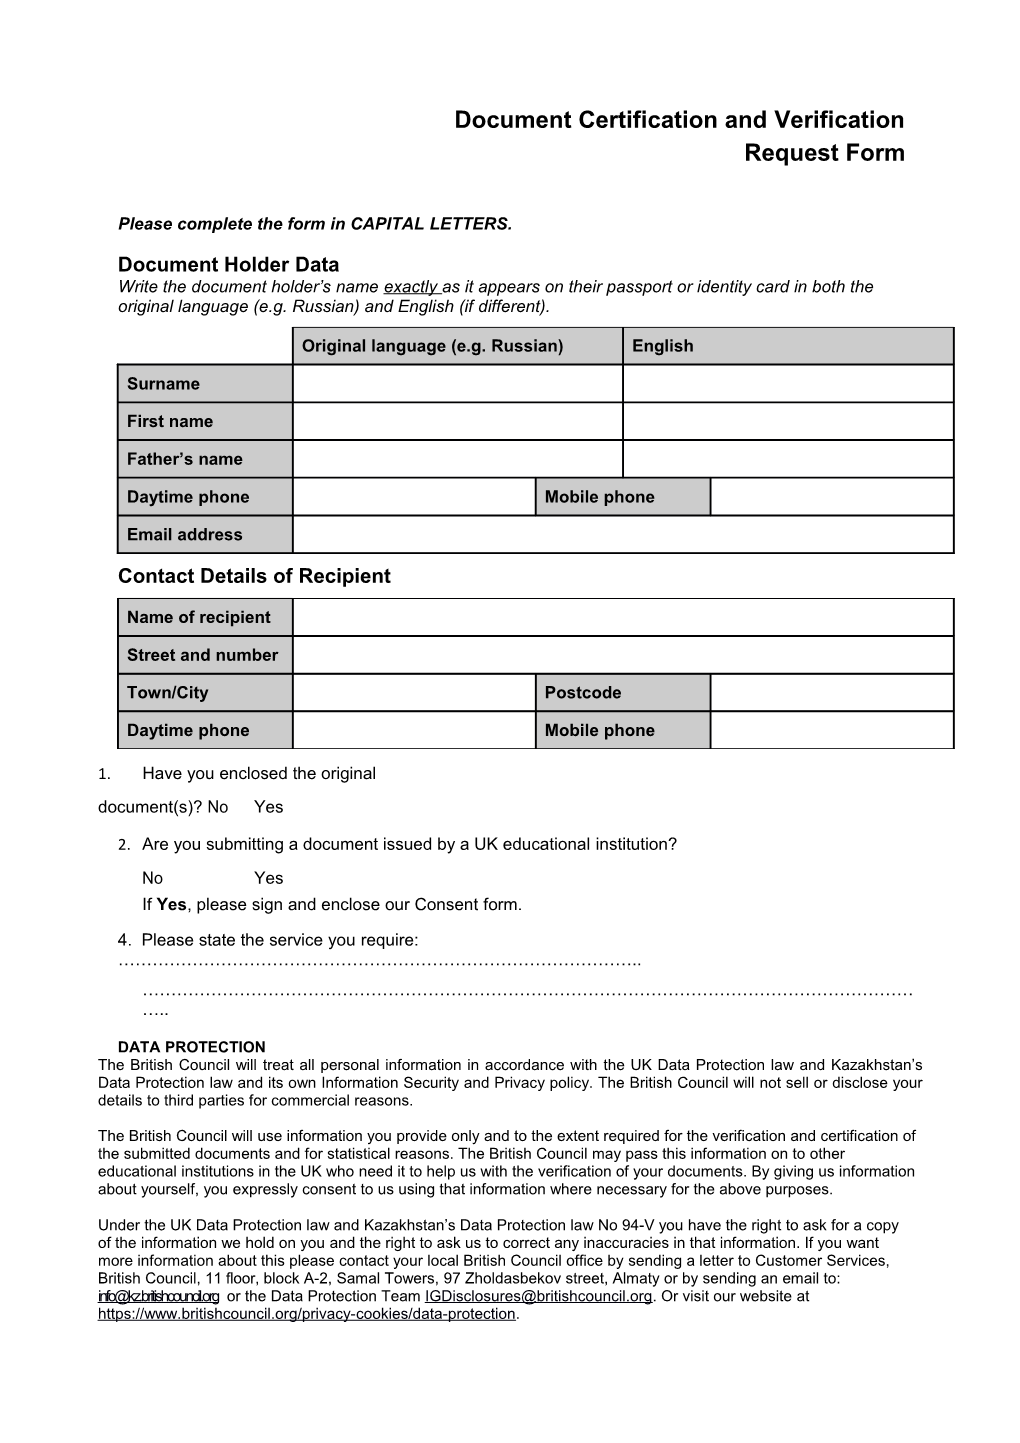 Document Translation and Verification Request Form